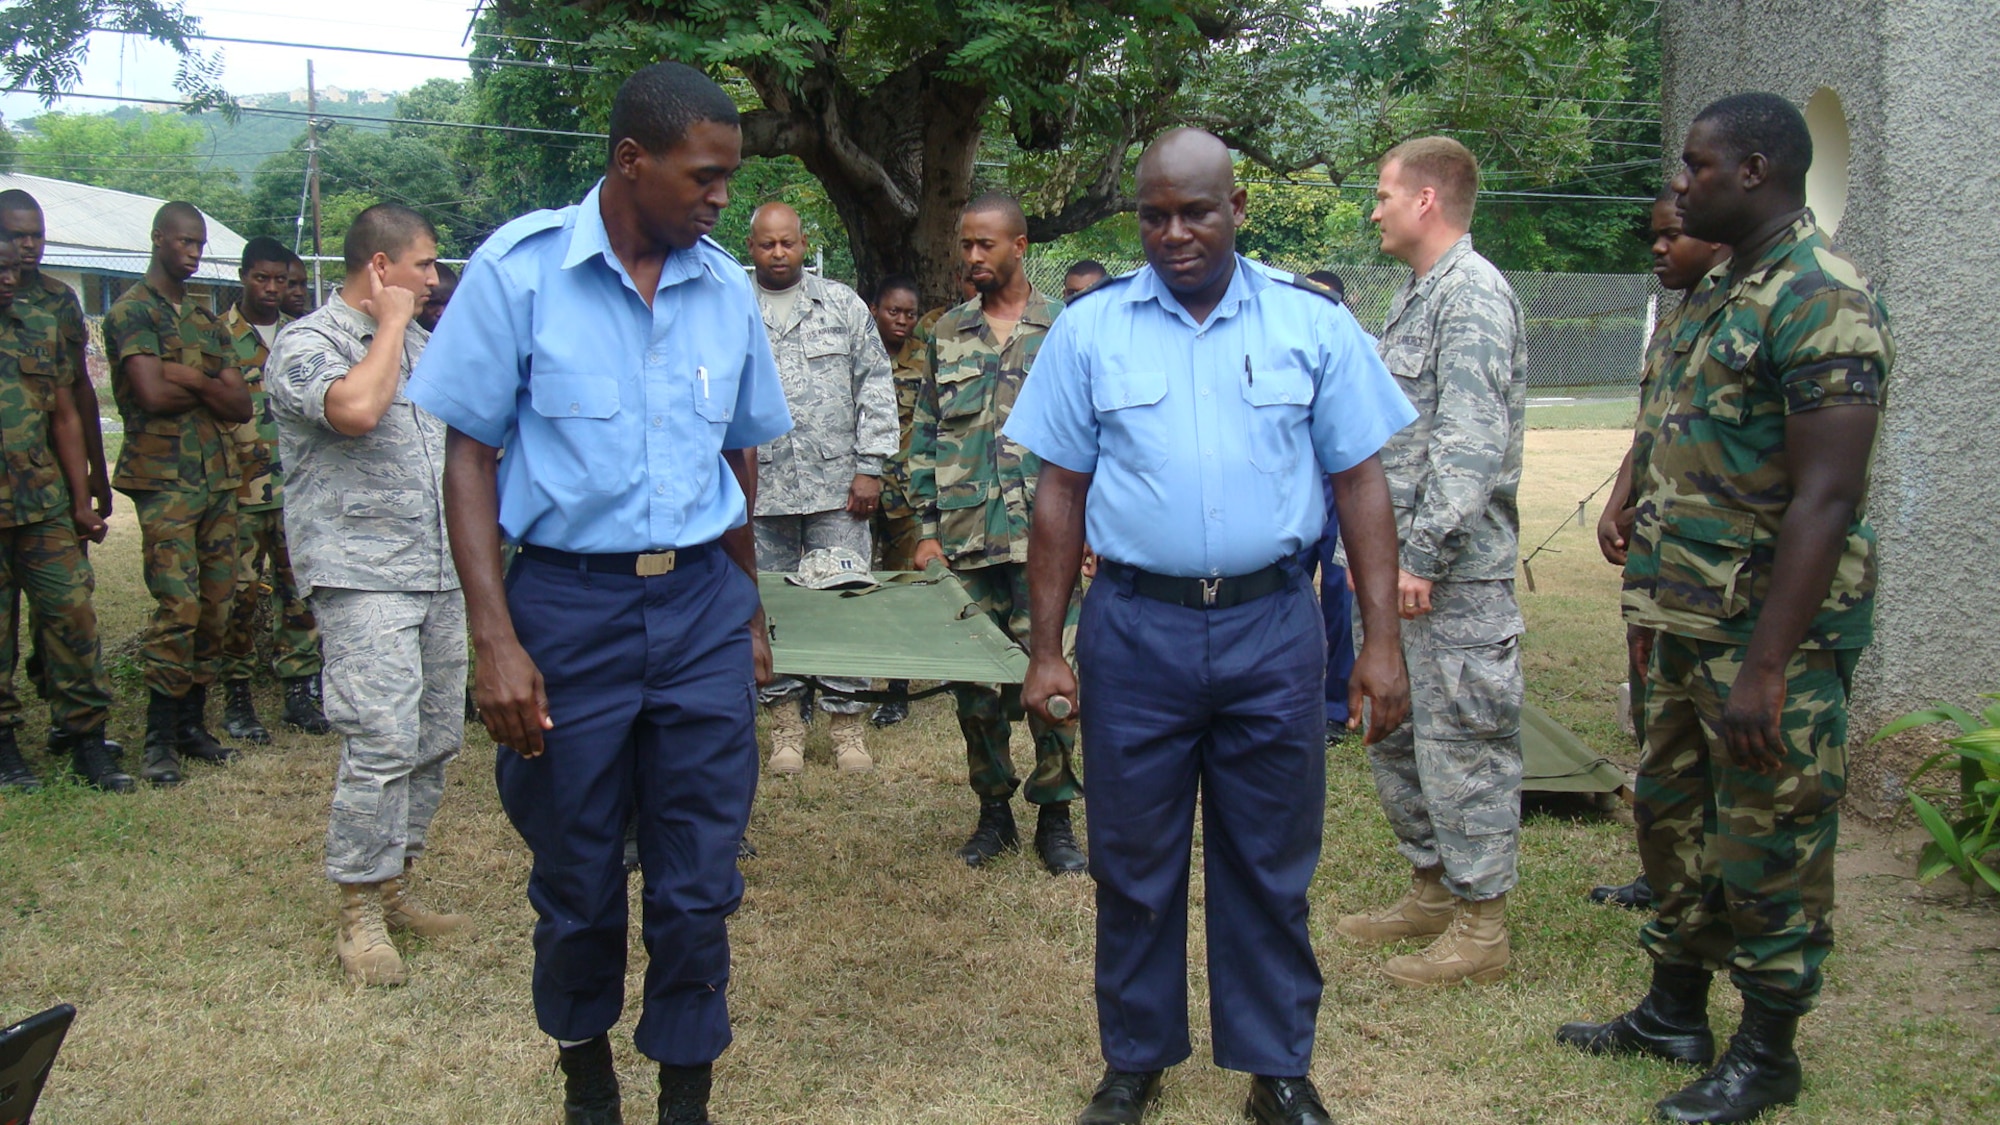 U. S. Air Force instructors with the Defense Institute for Medical Operations based at  Brooks City-Base, Texas, train local first responders on proper litter carry skills in Kingston, Jamaica. (Air Force photo)